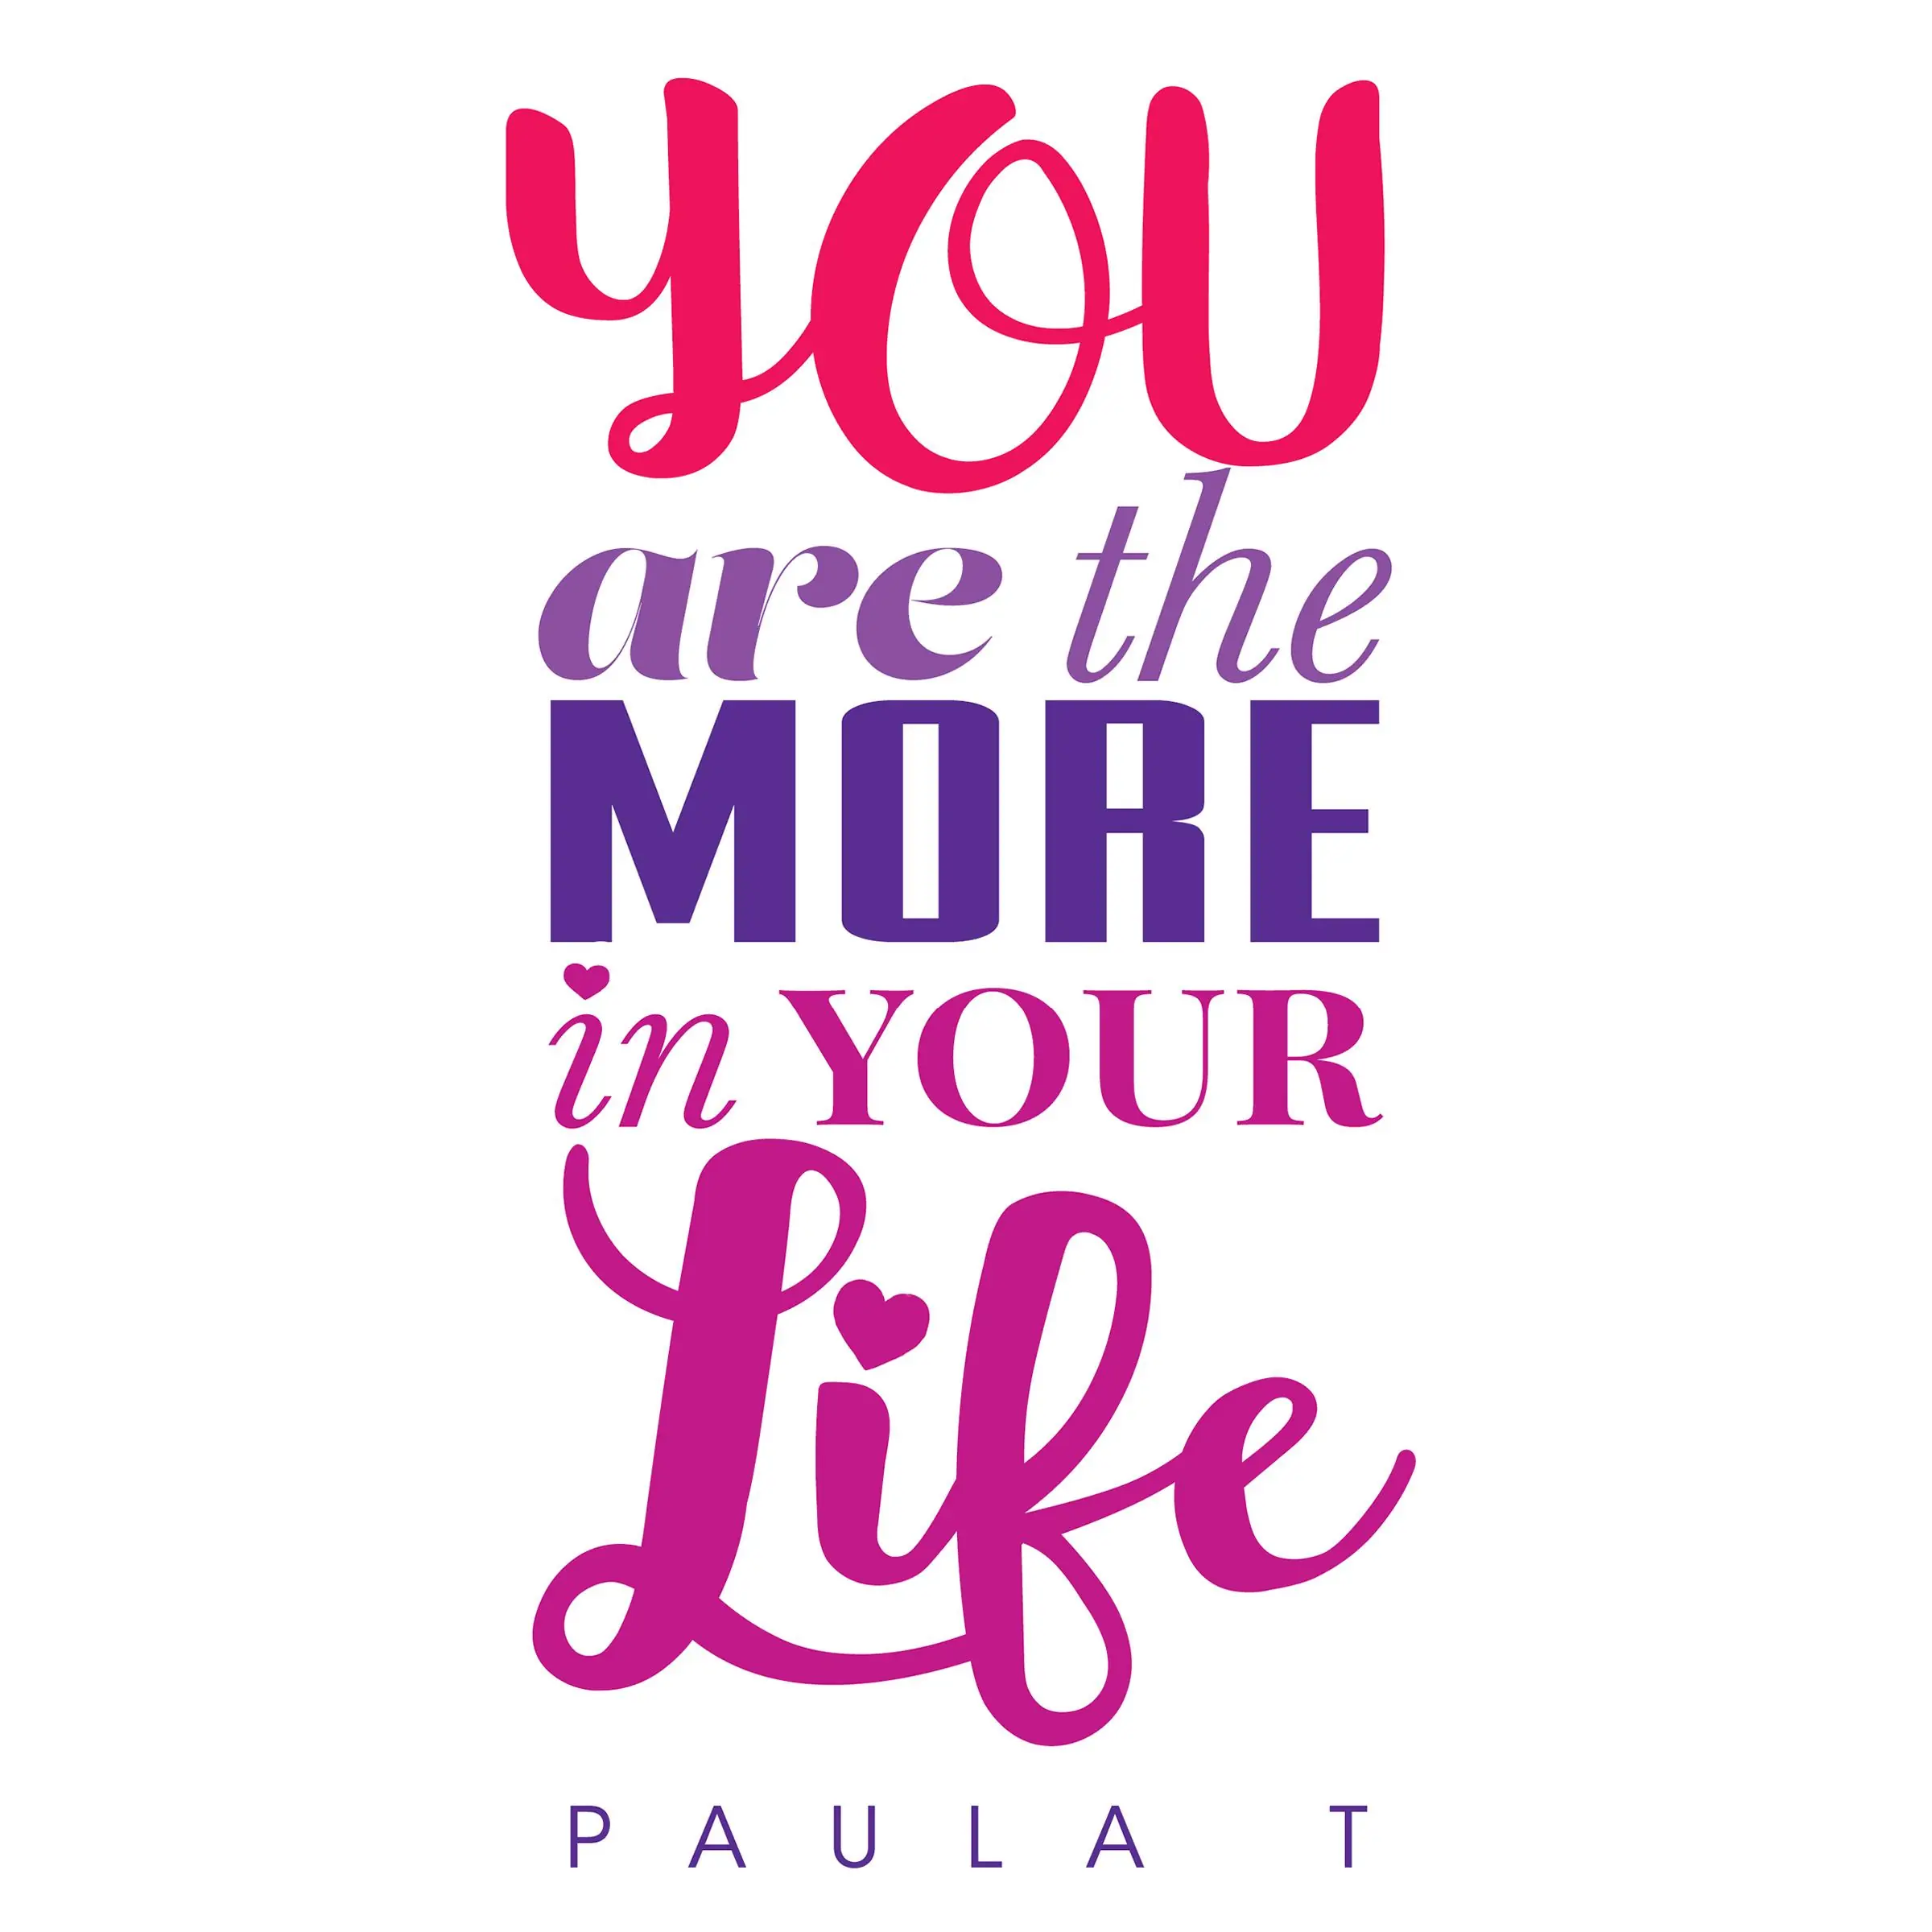 You Are The More In Your Life Audiobook by Paula Tresintsis